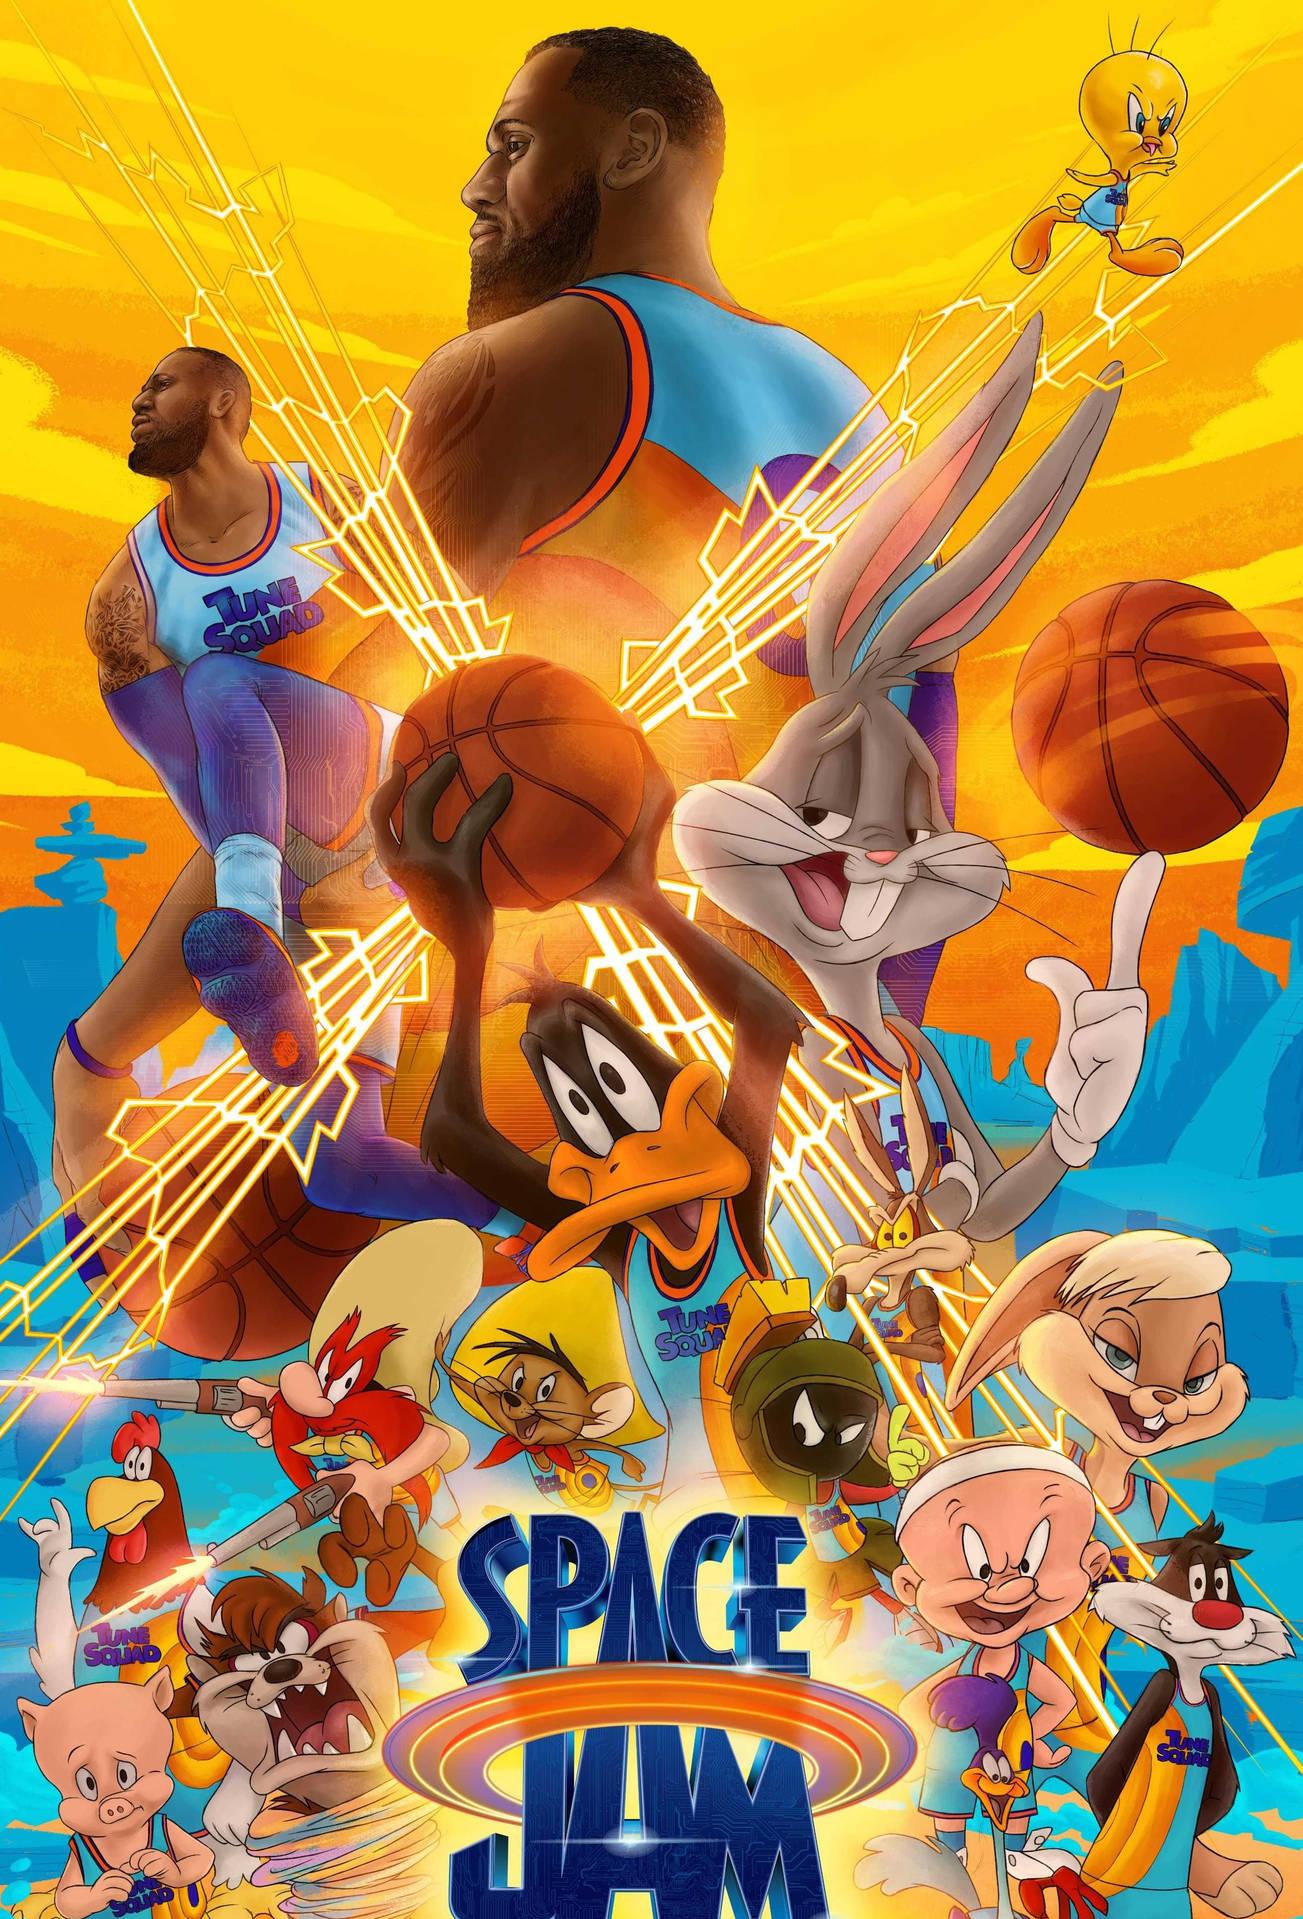 Download Michael Jordan is back in Space Jam where he faces off